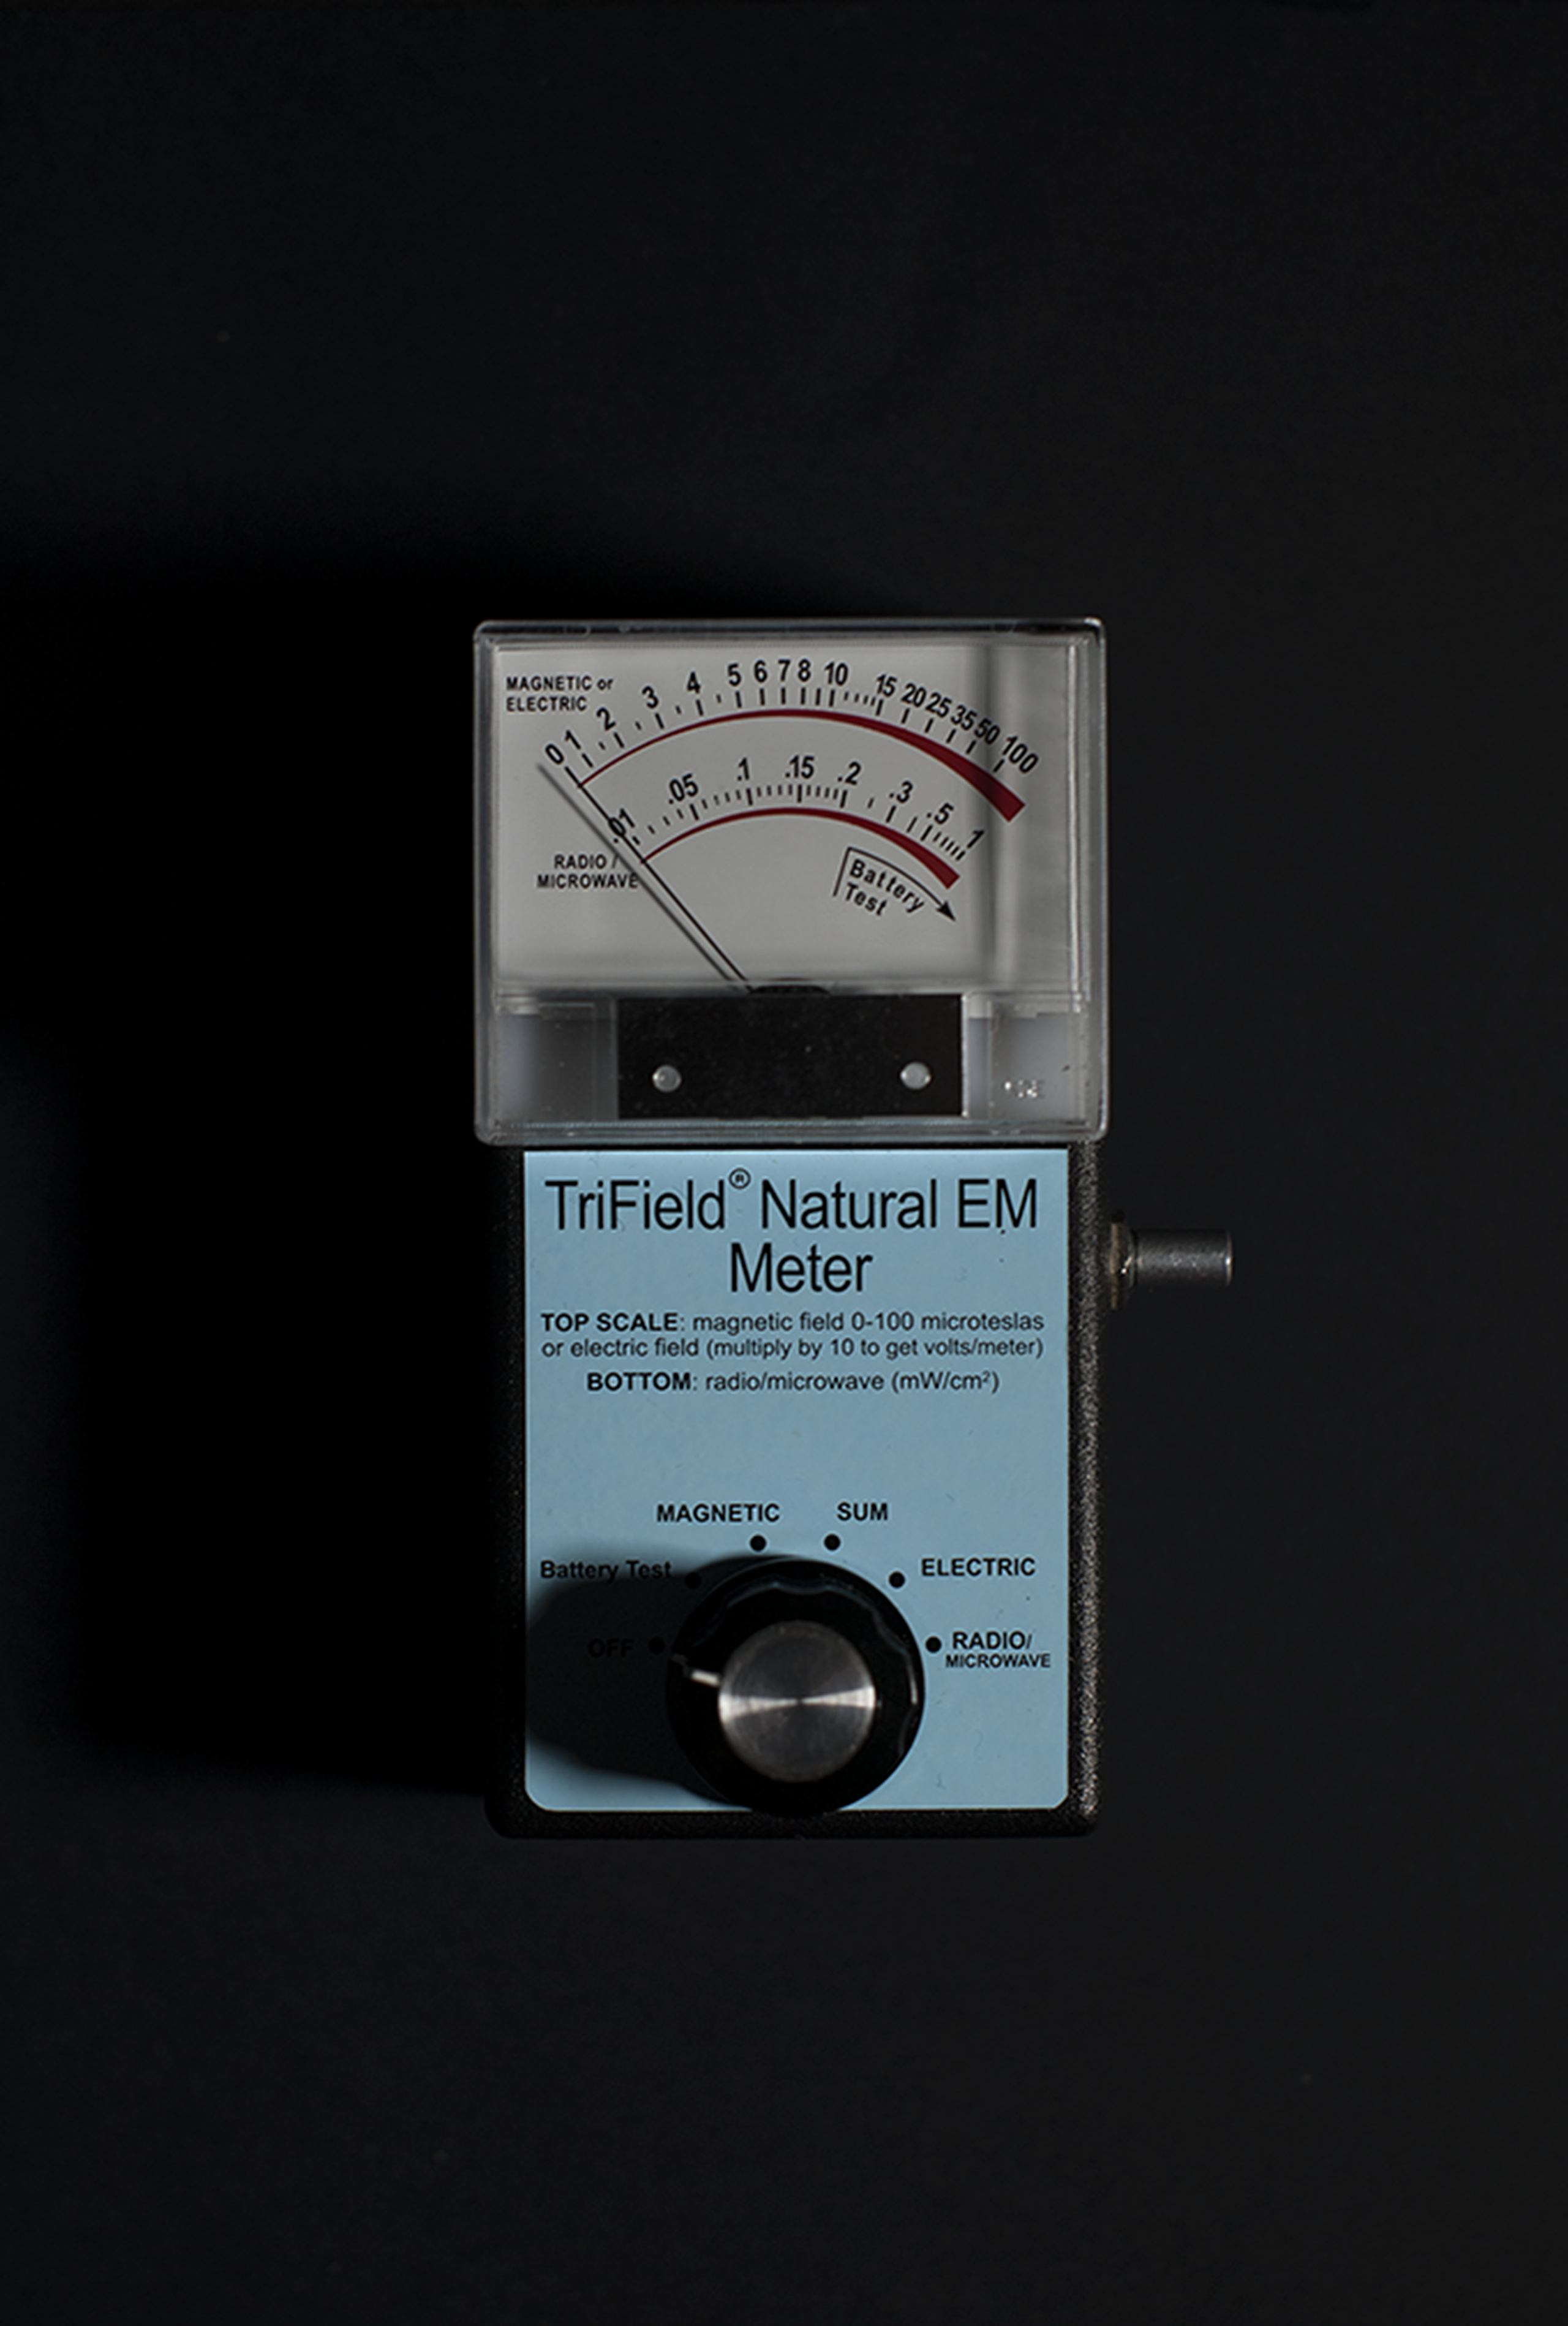 The Natural EM Meter detects radio/microwaves and changes in extremely weak static (DC or “Natural”) electric and magnetic fields. It is so highly sensitive that it will detect the presence of body parts. What makes this unit so useful for paranormal work is the audio tone which alerts the user to activity in the vicinity of the meter. Several meters can be placed throughout a location unattended to track the movement of activity.